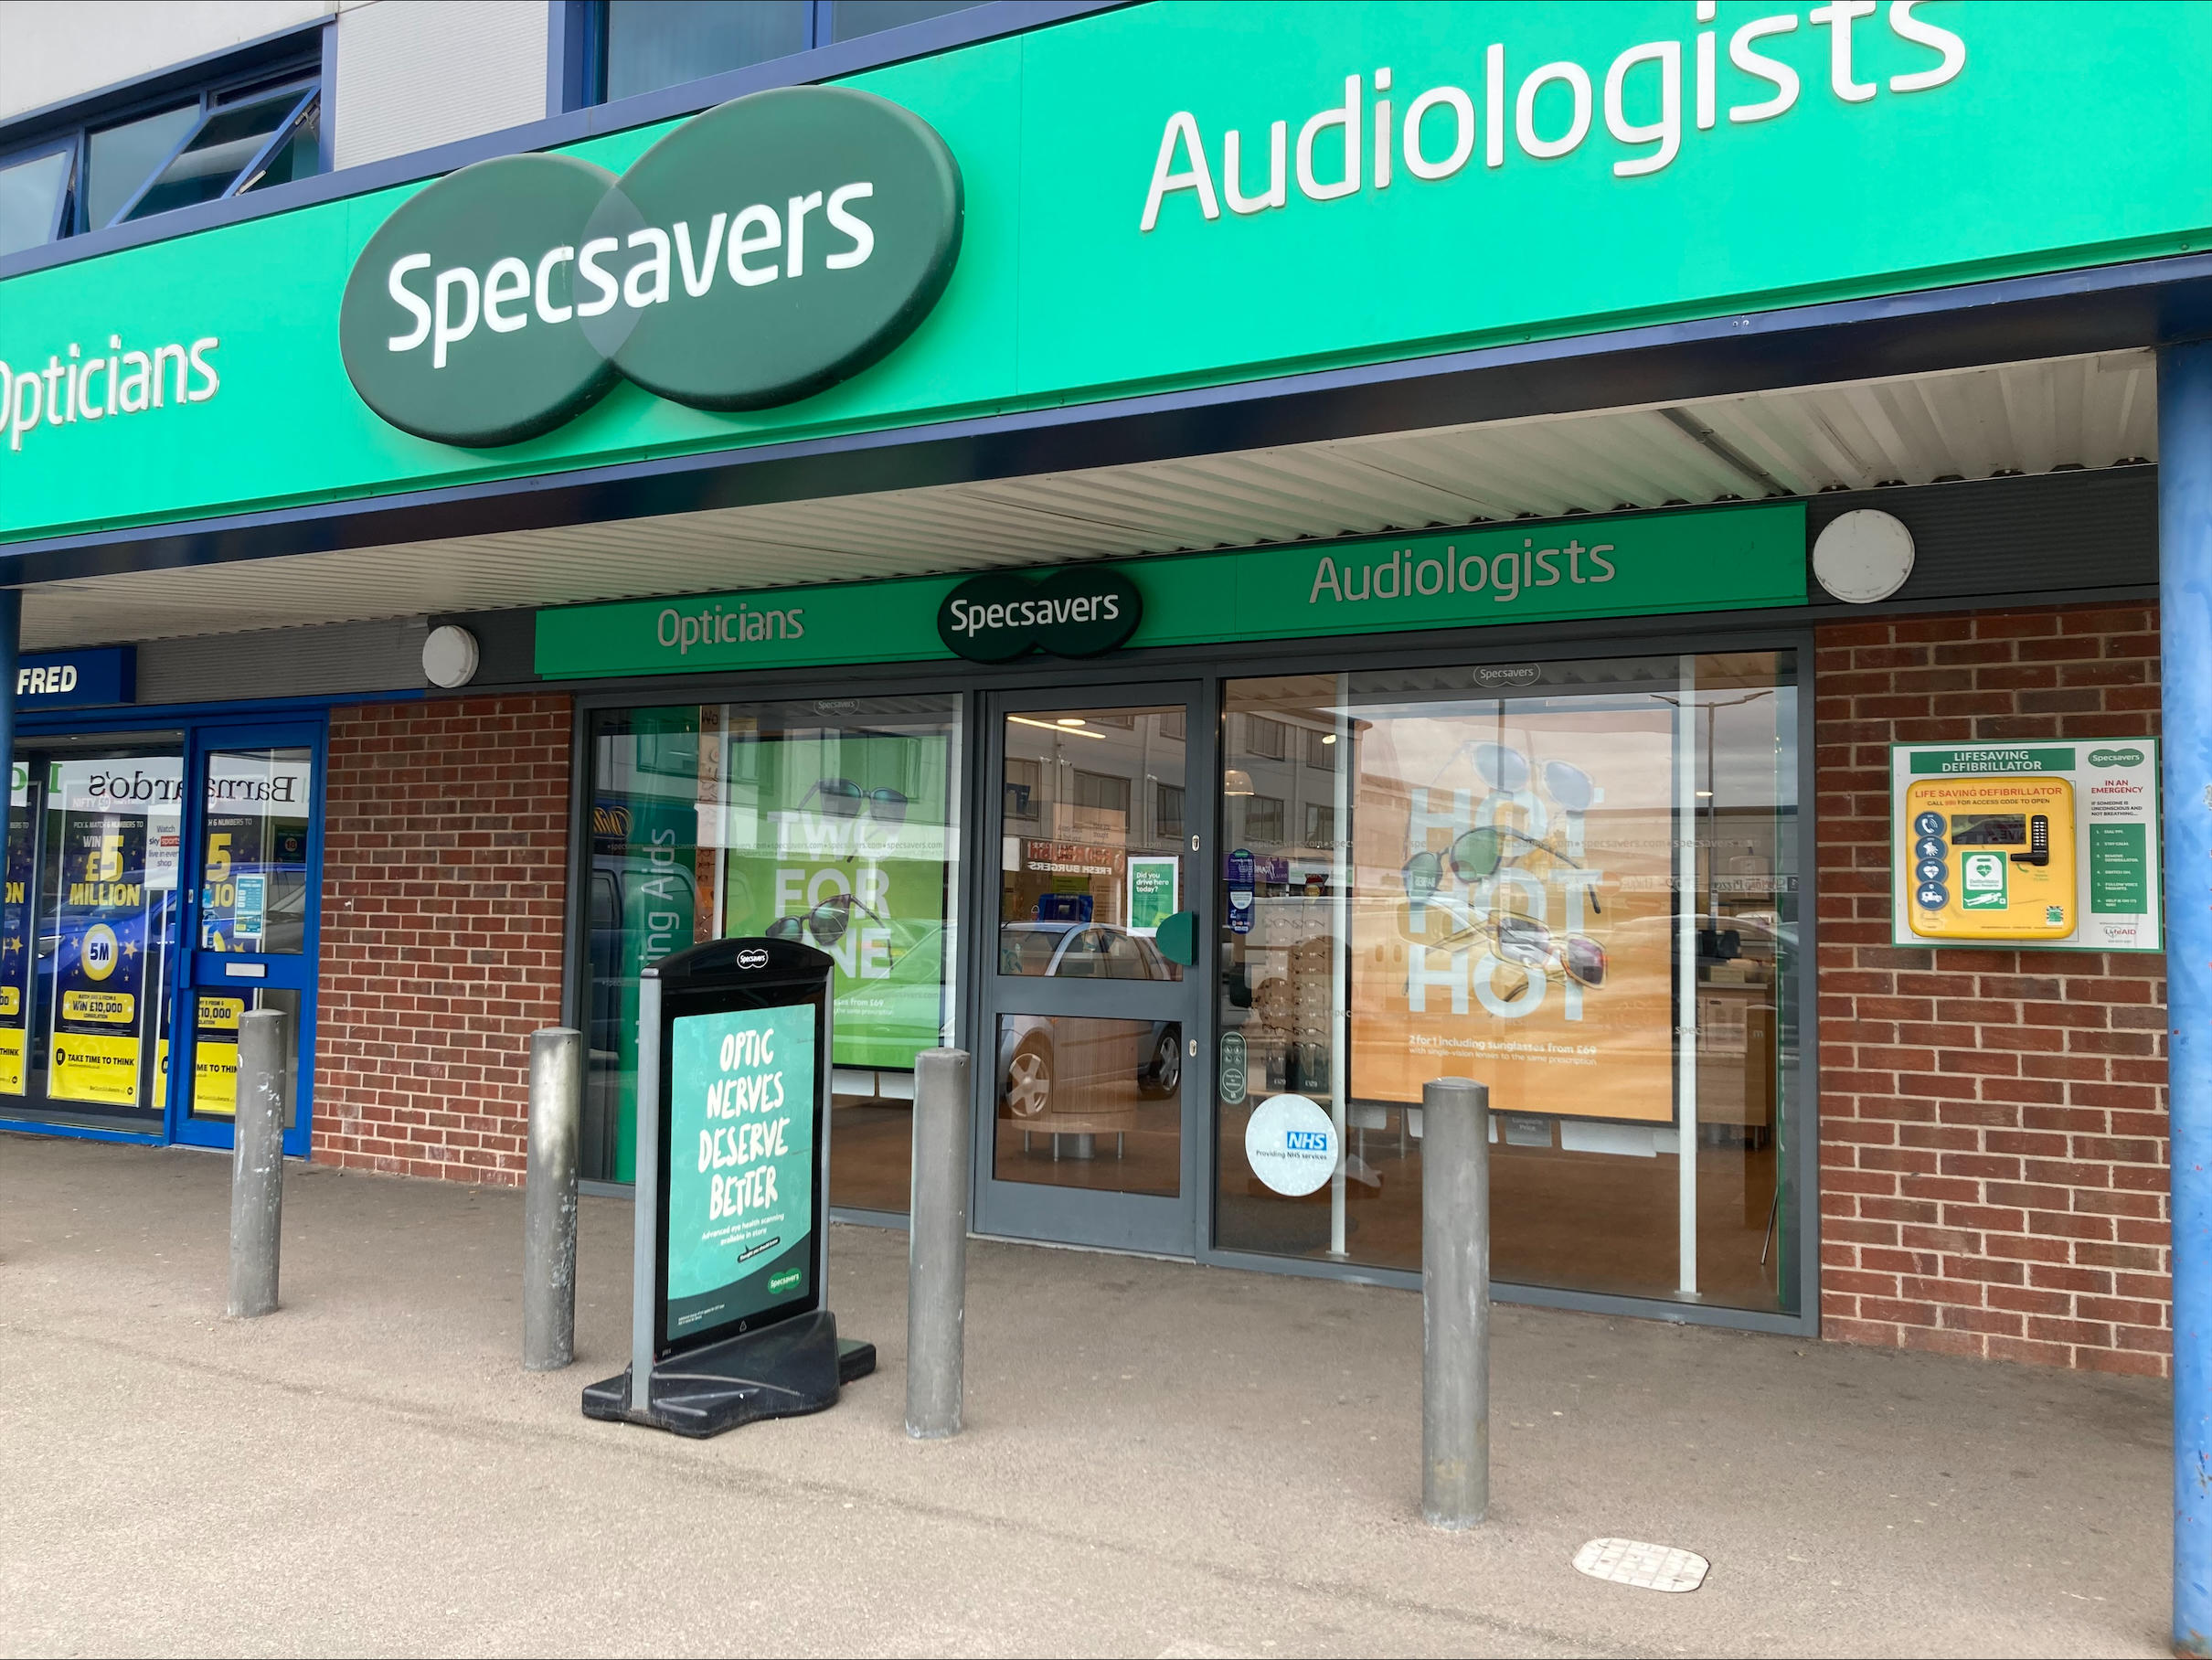 Images Specsavers Opticians and Audiologists - Armthorpe